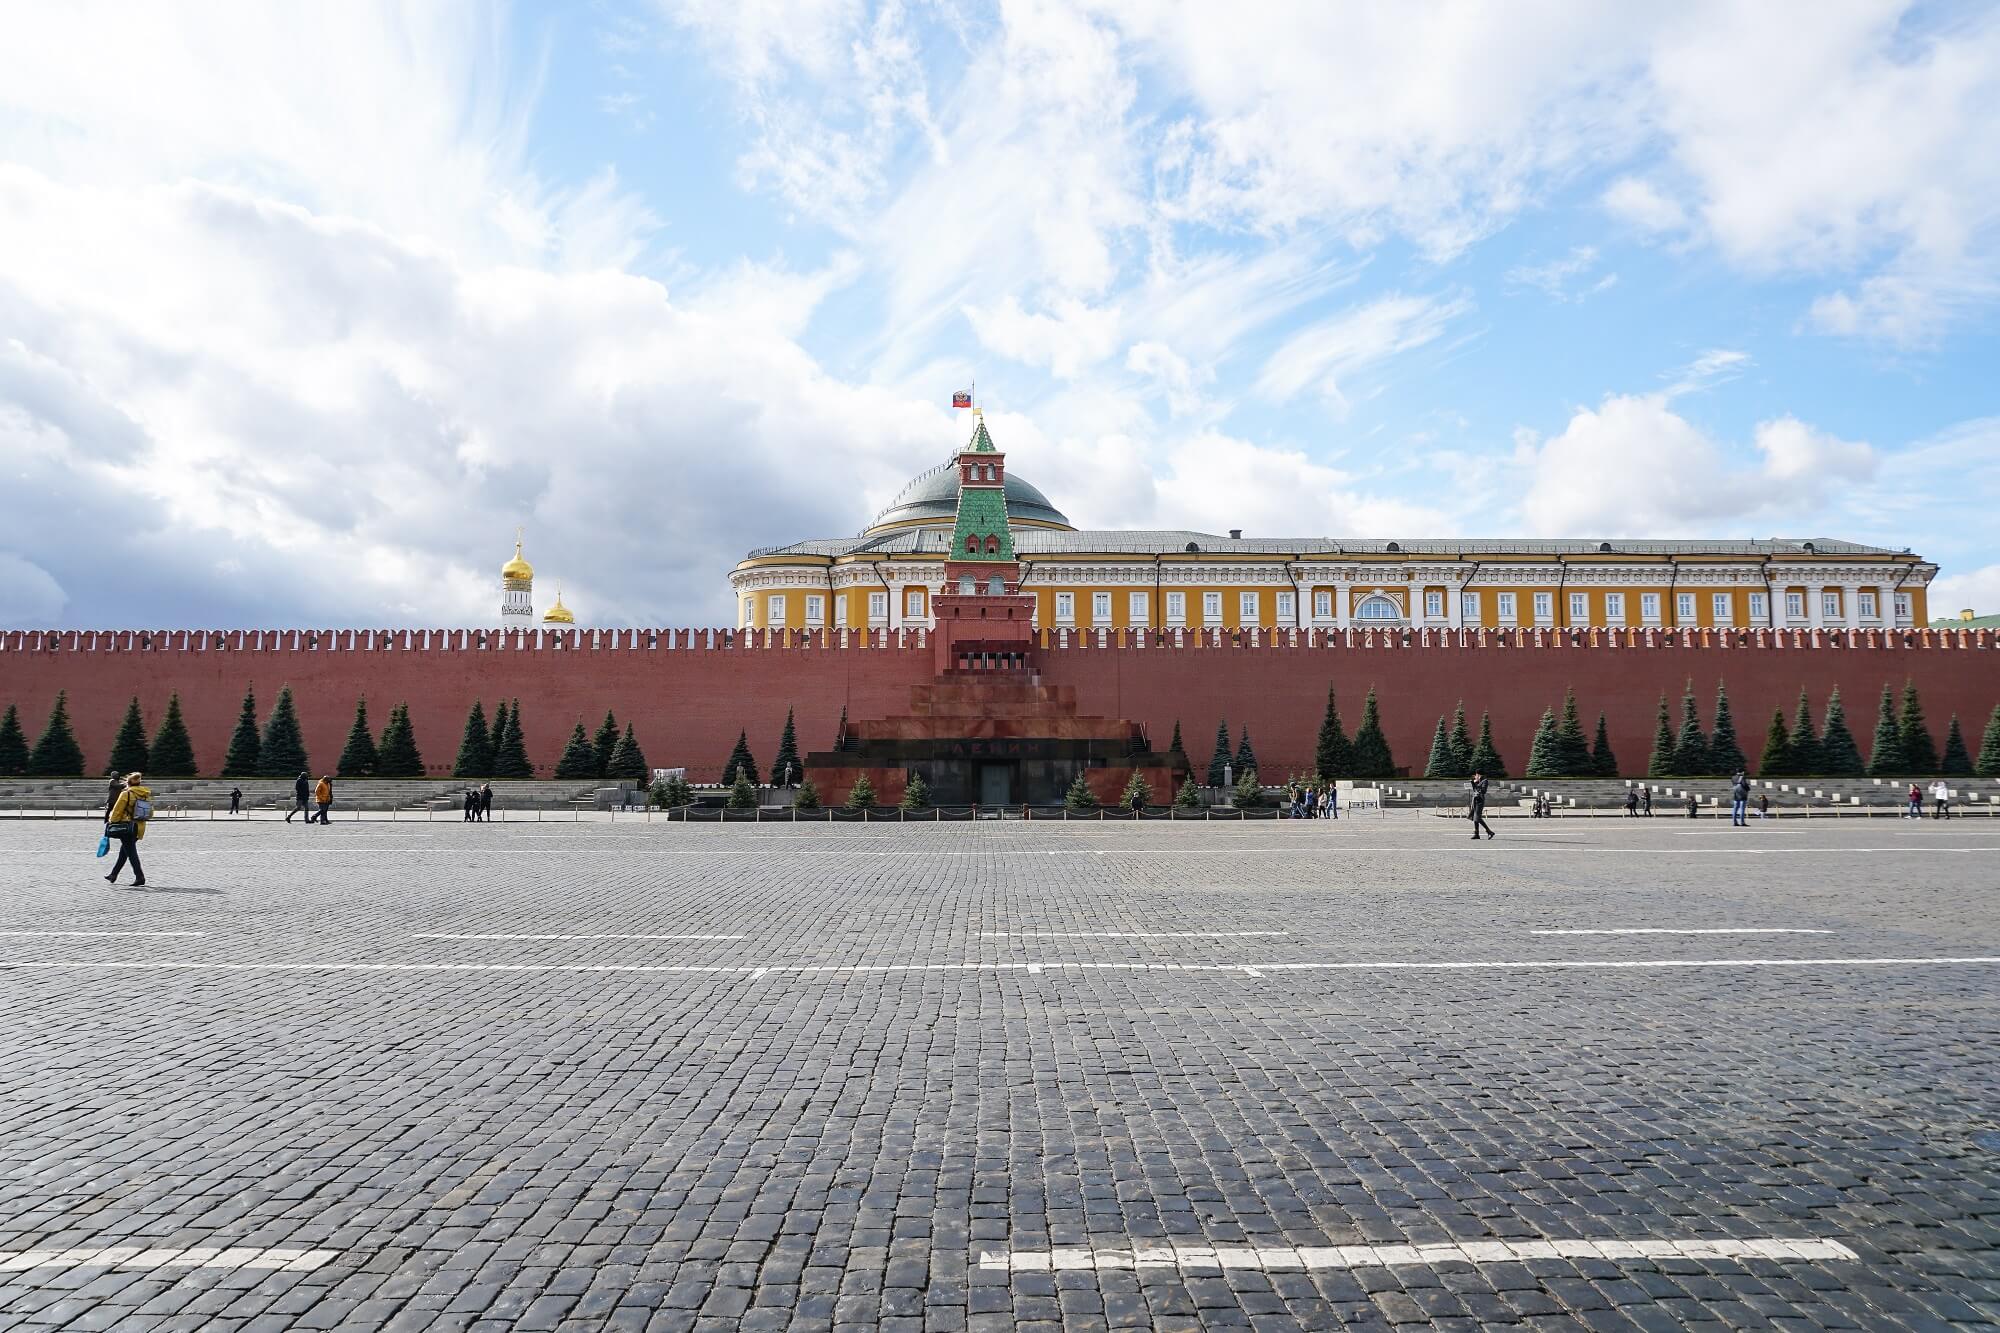 Lenin’s Mausoleum located next to the Moscow Kremlin Wall